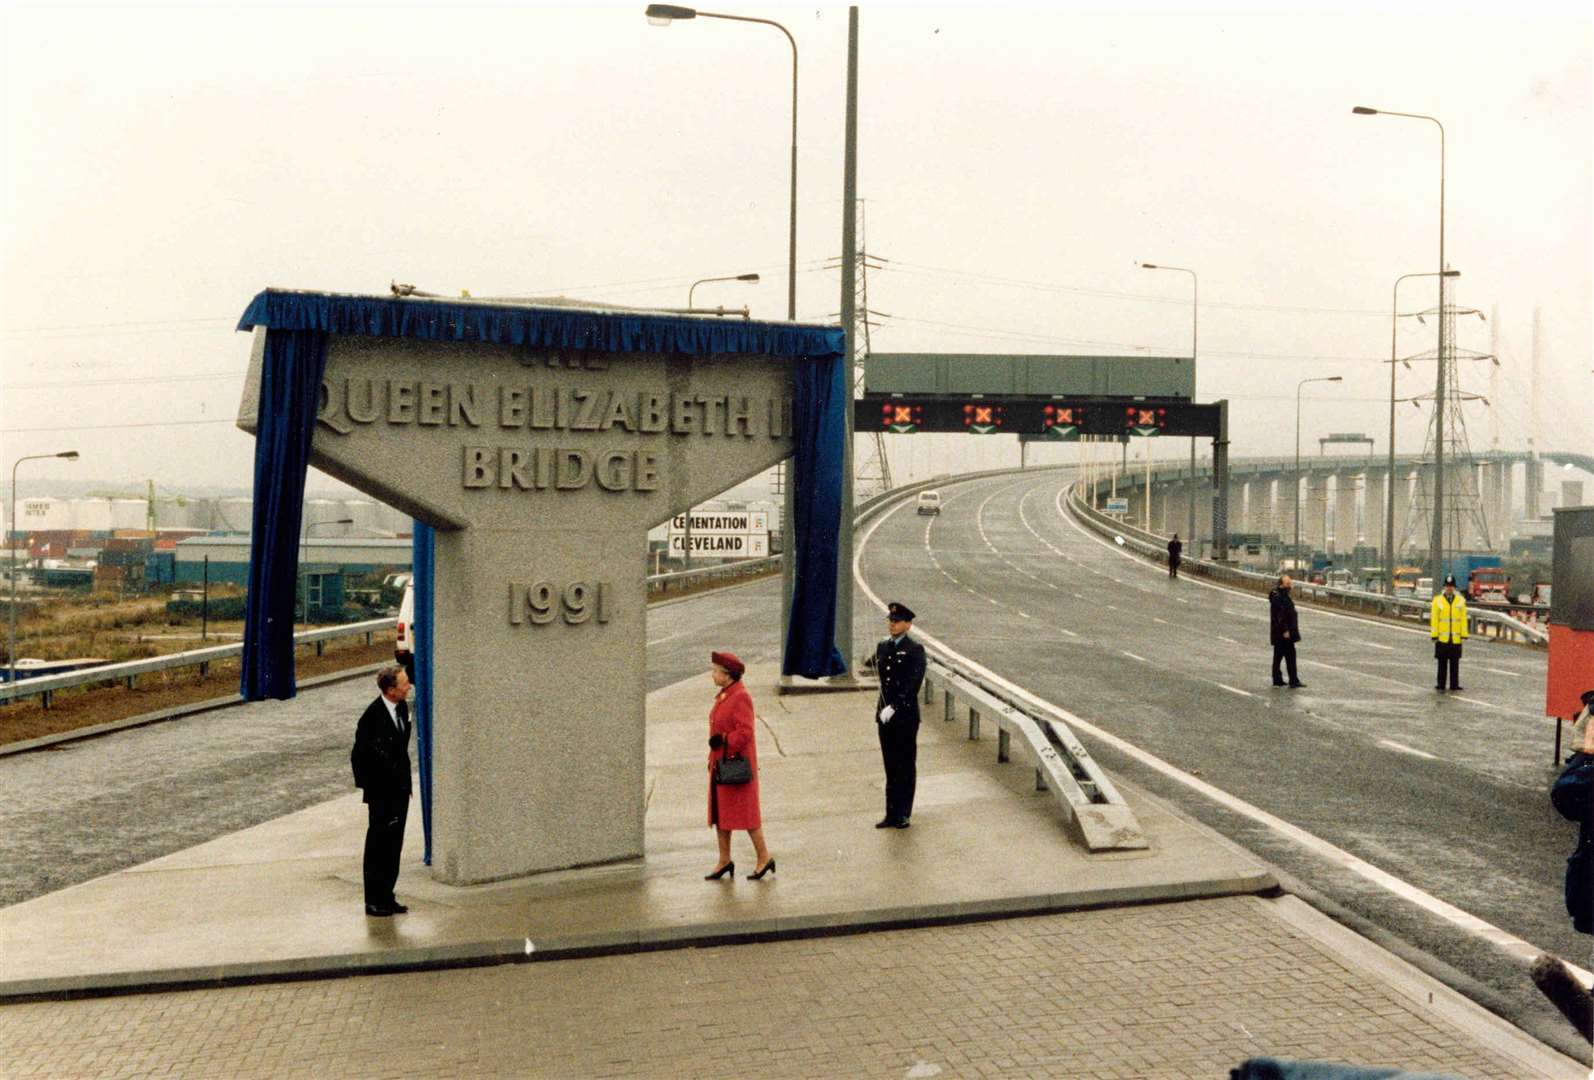 The Queen officially opened the bridge at Dartford by unveiling a monument on the Essex side in 1991